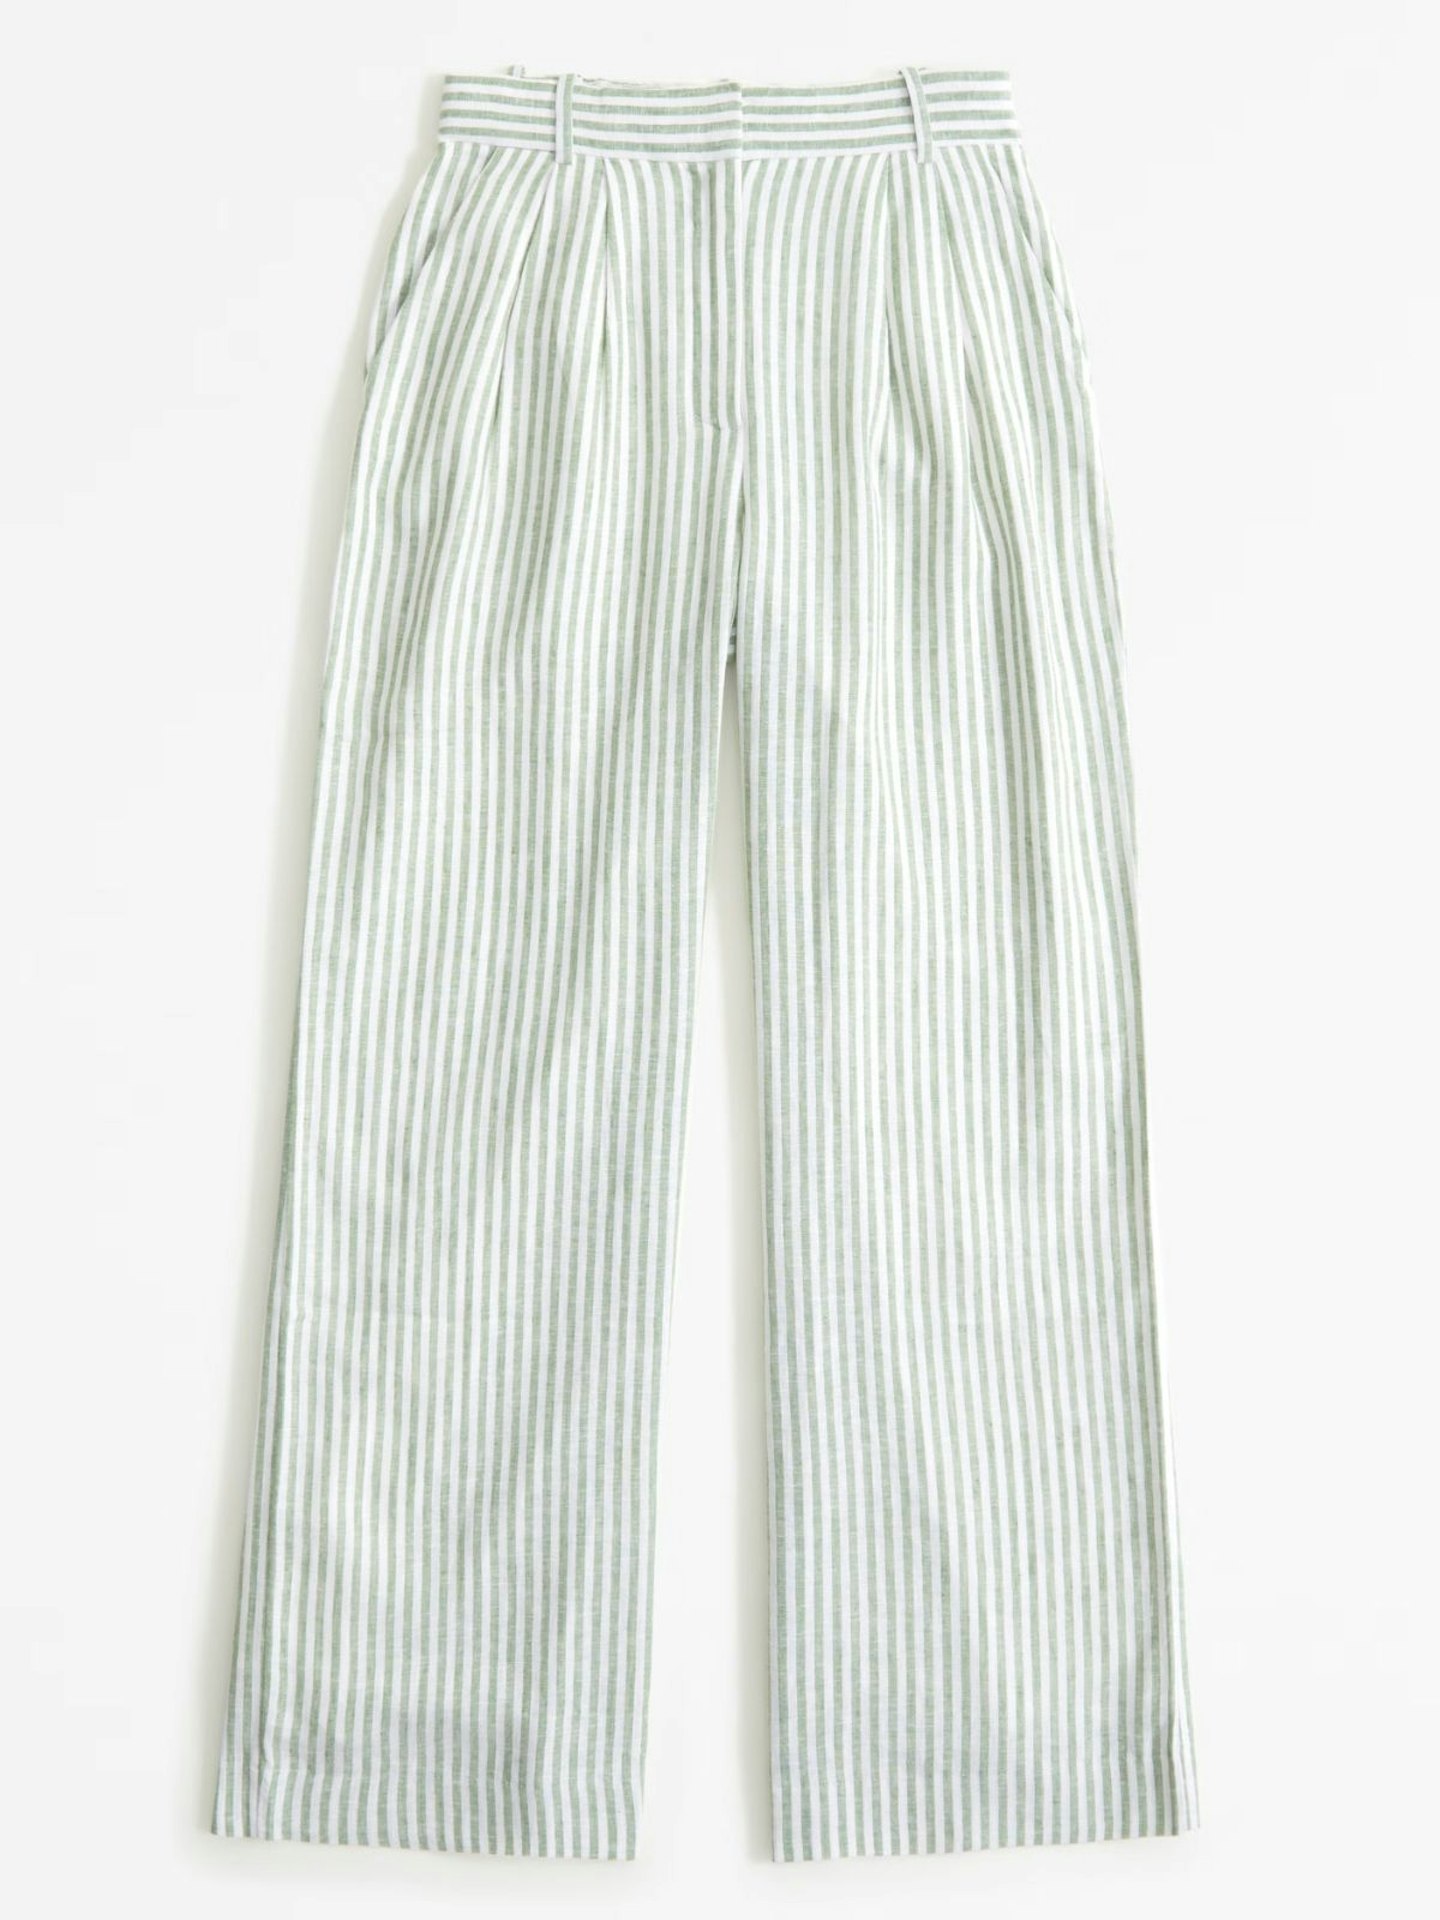 Abercrombie & Fitch Sloane Tailored Linen-Blend Pant